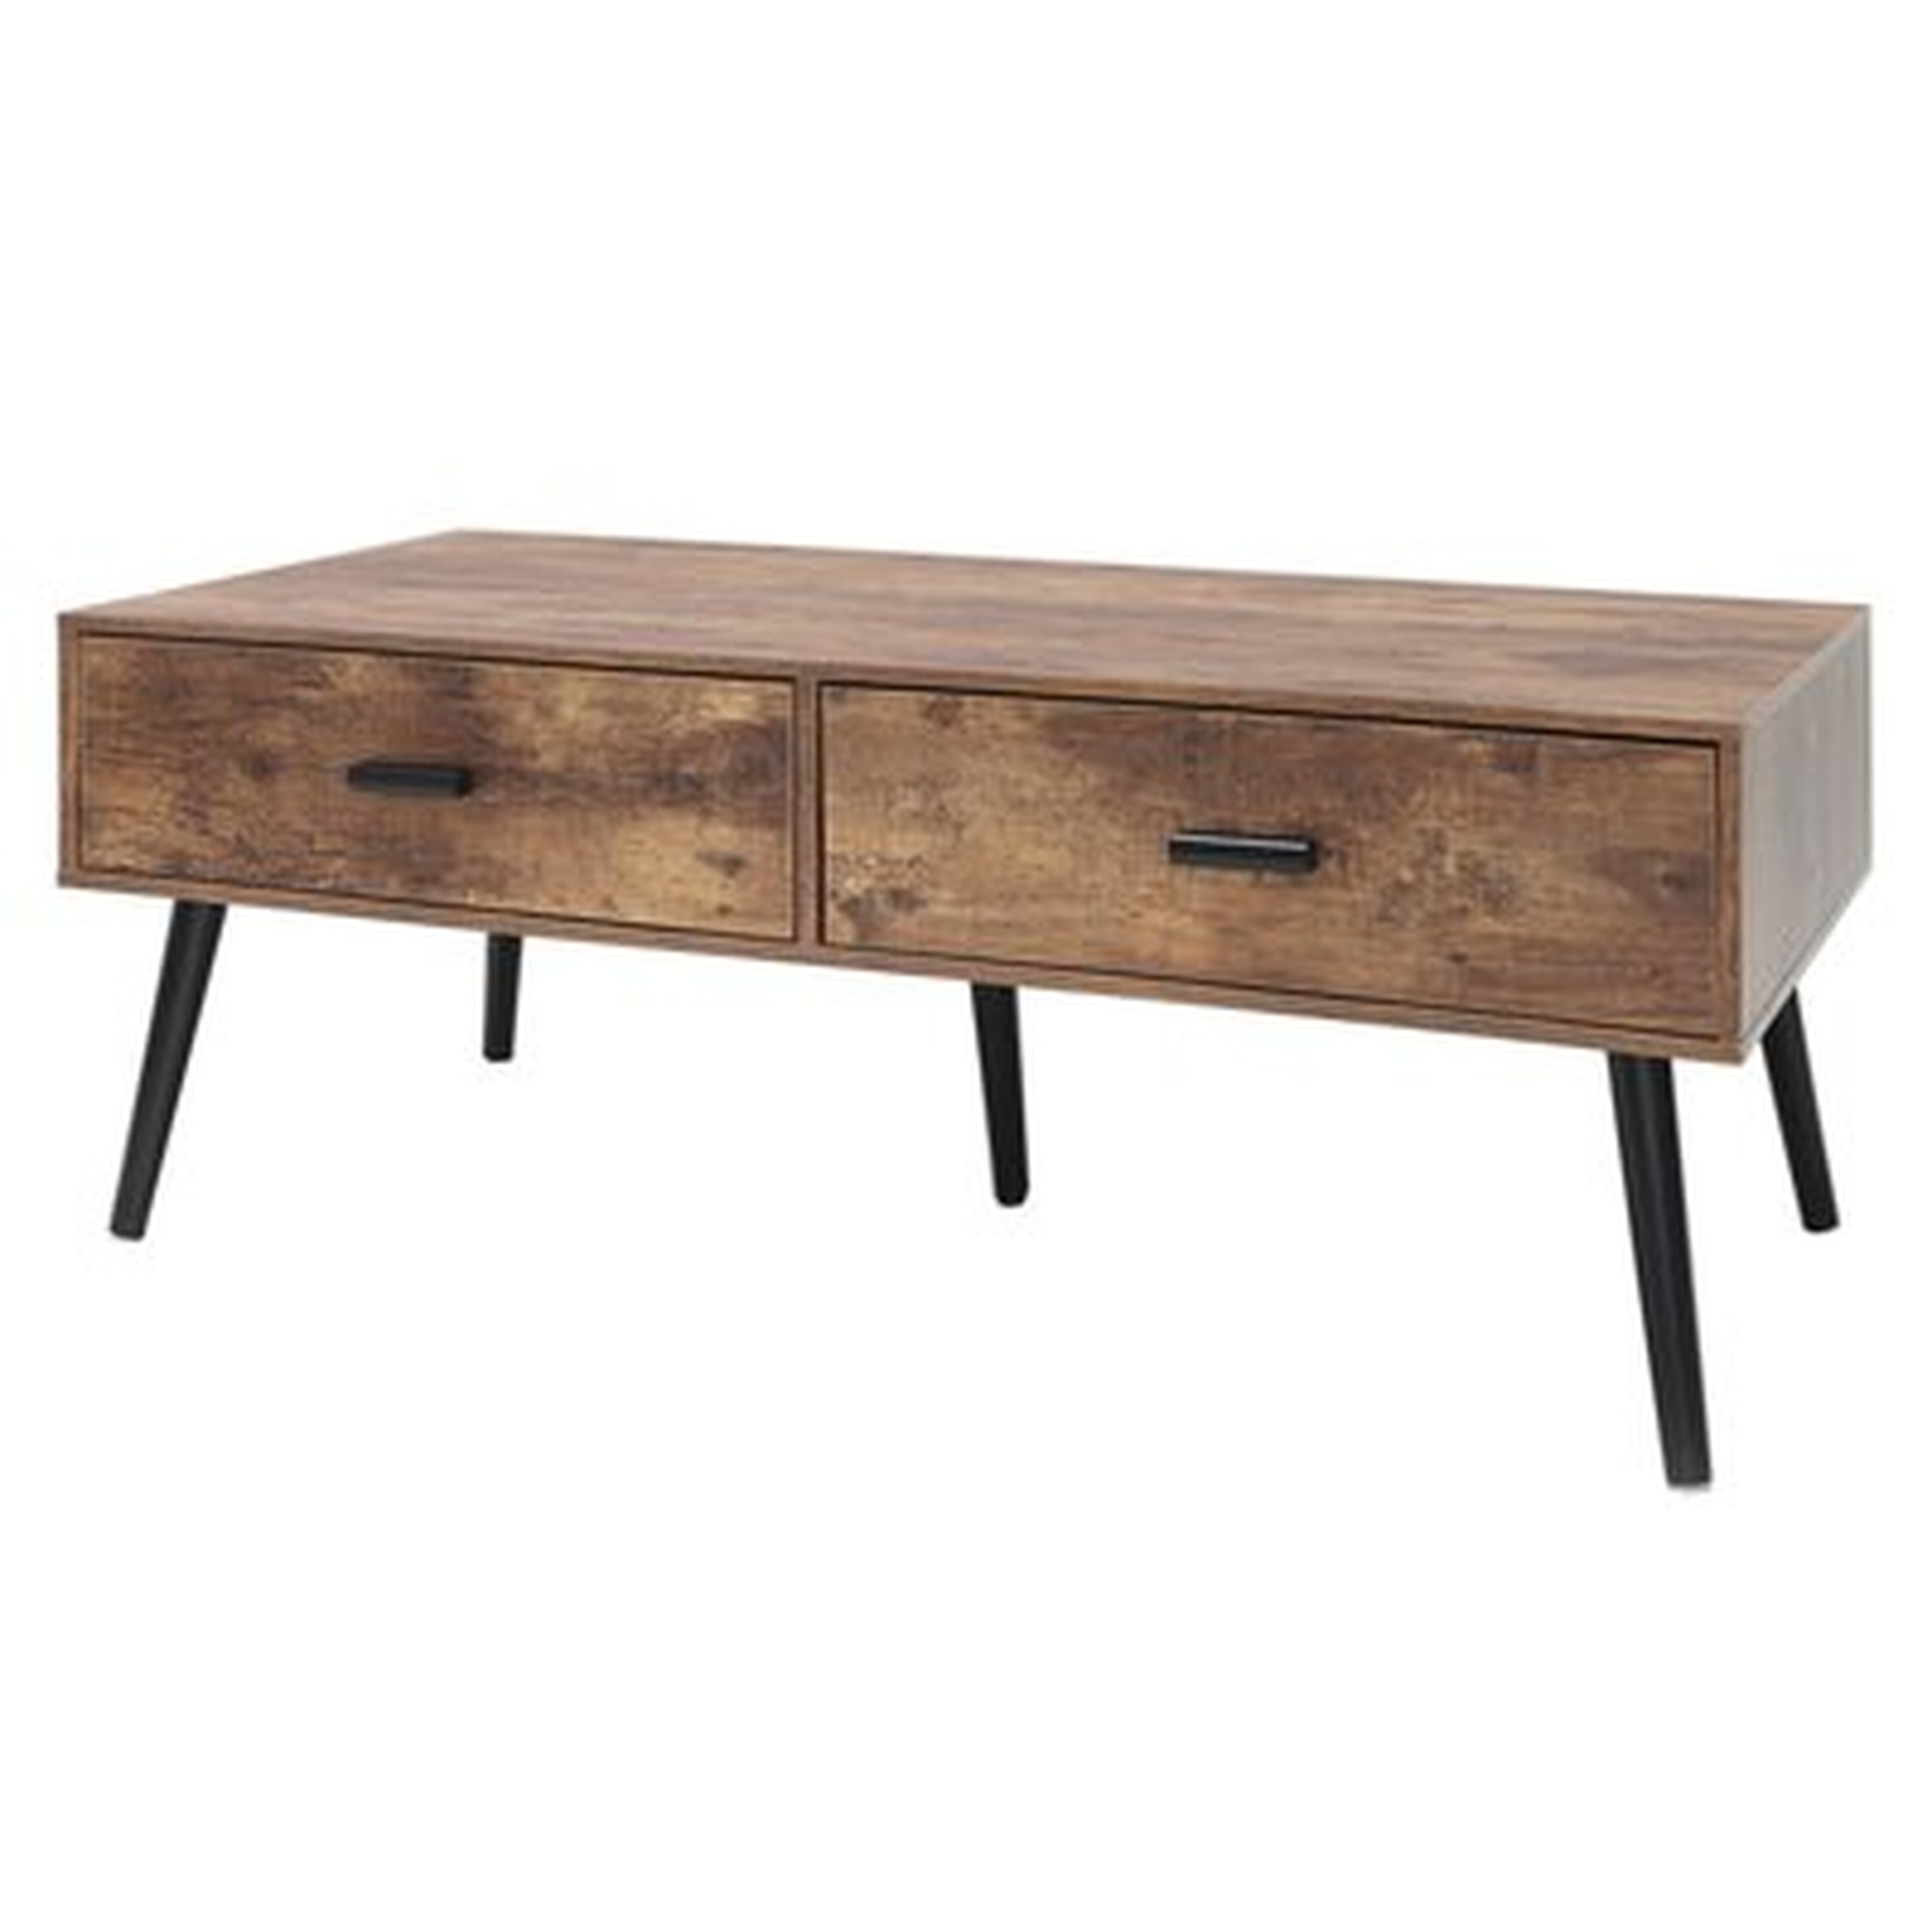 Millwood Pines Mid-Century Modern Coffee Table With 2 Drawers And Storage Shelf For Living Room, Boho TV Table, Vintage Cocktail Table, Sofa Table, Office Table, Elegant Functional Table, Rustic Brown - Wayfair